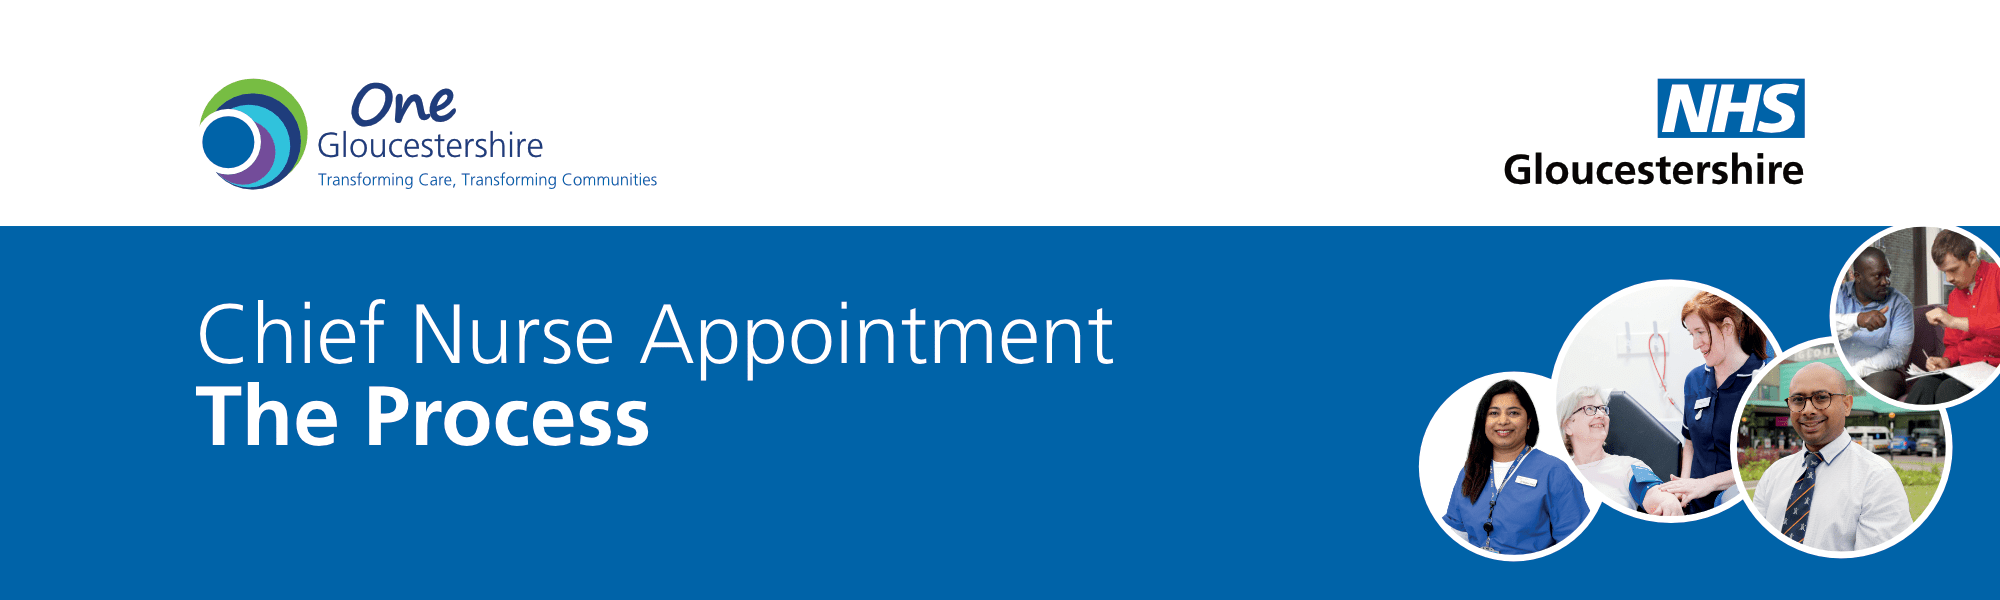 Chief Nurse Appointment - The Process